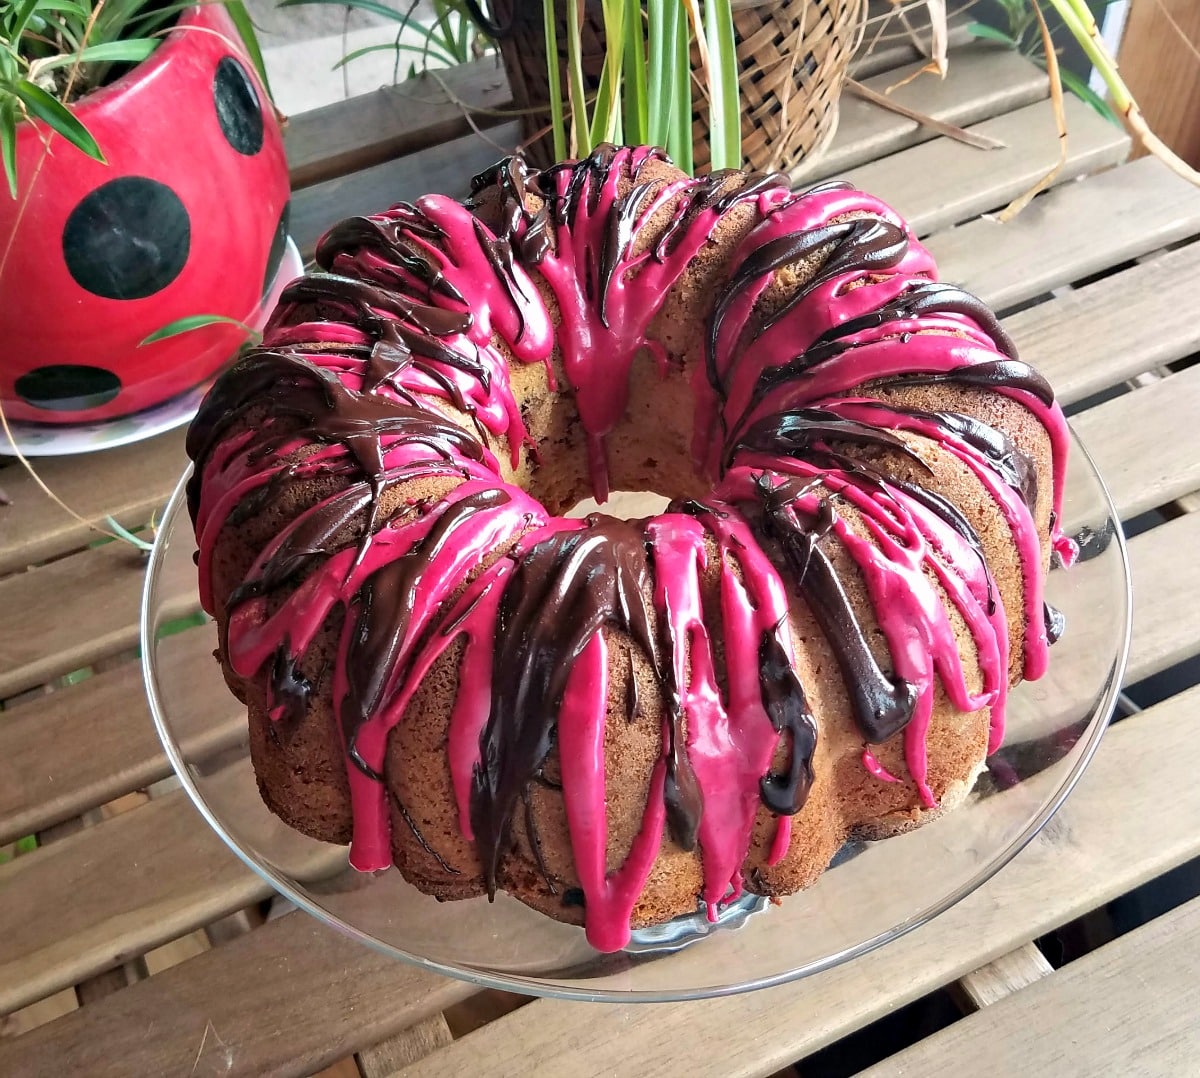 Huckleberry Swirl Bundt Cake with Huckleberry and Chocolate Drizzles